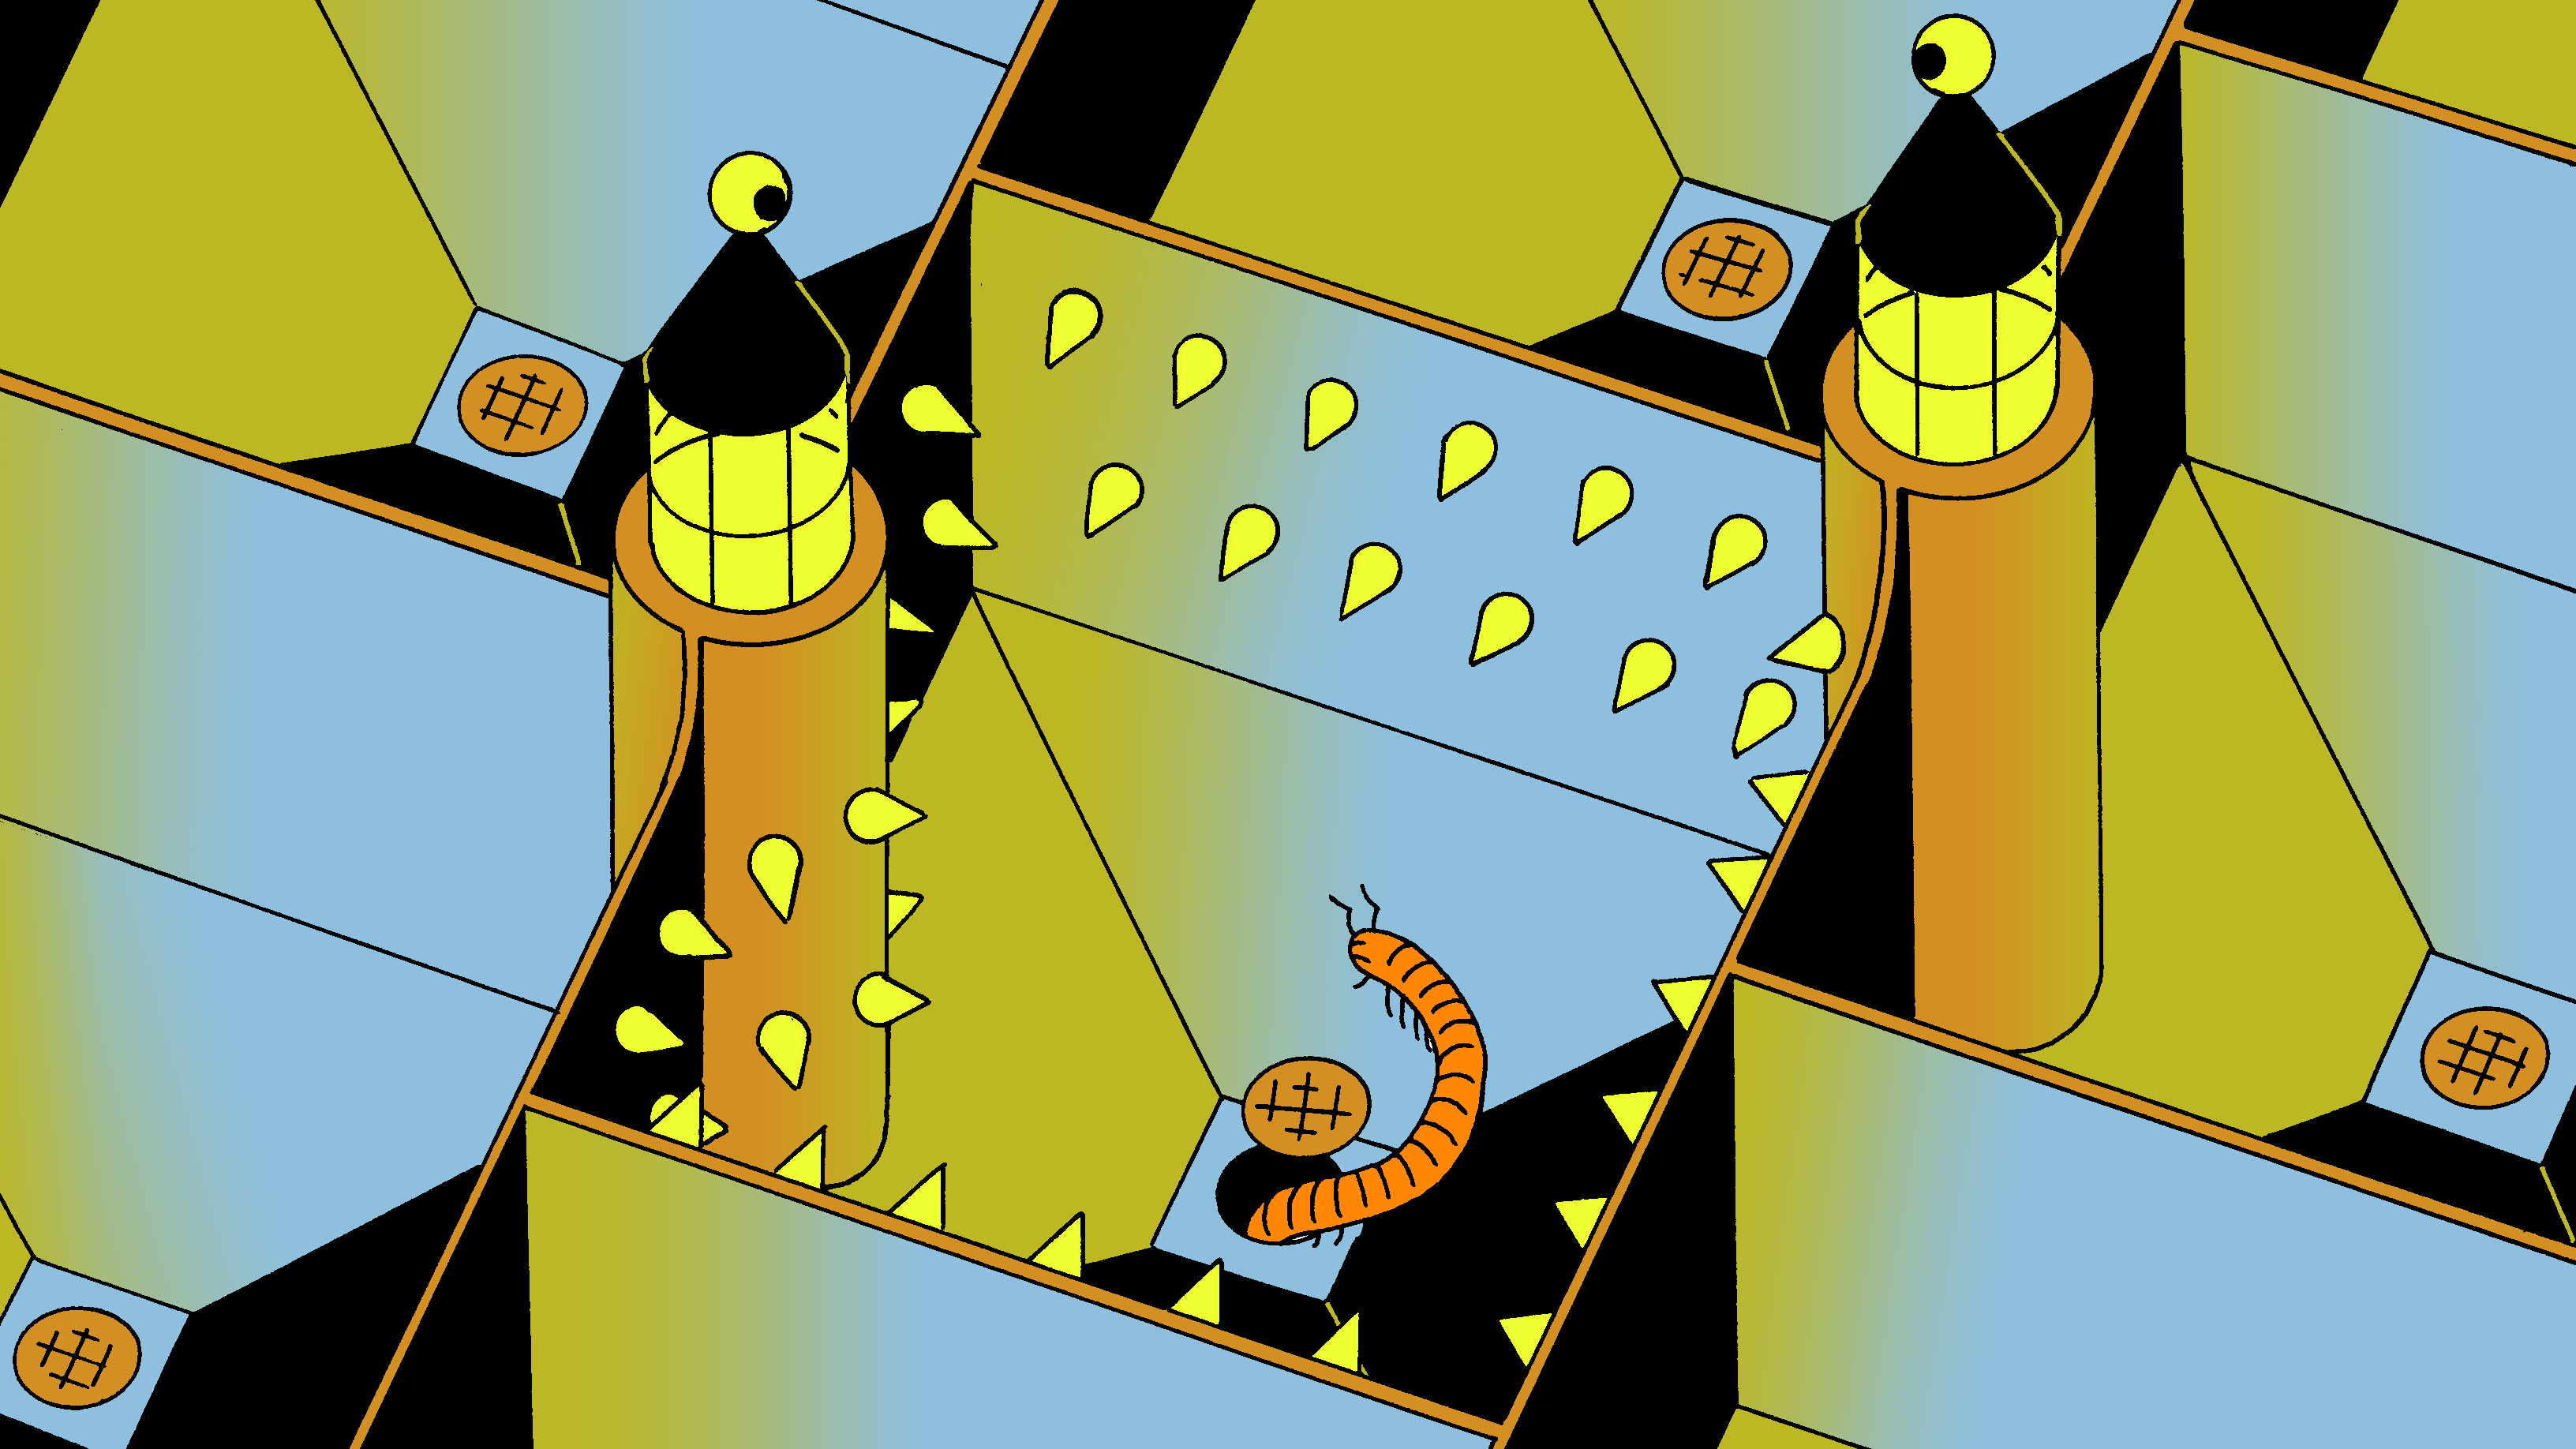 A millipede gets into a castle by going up through the drain into a pit with spikes. The pit stops it from getting out.